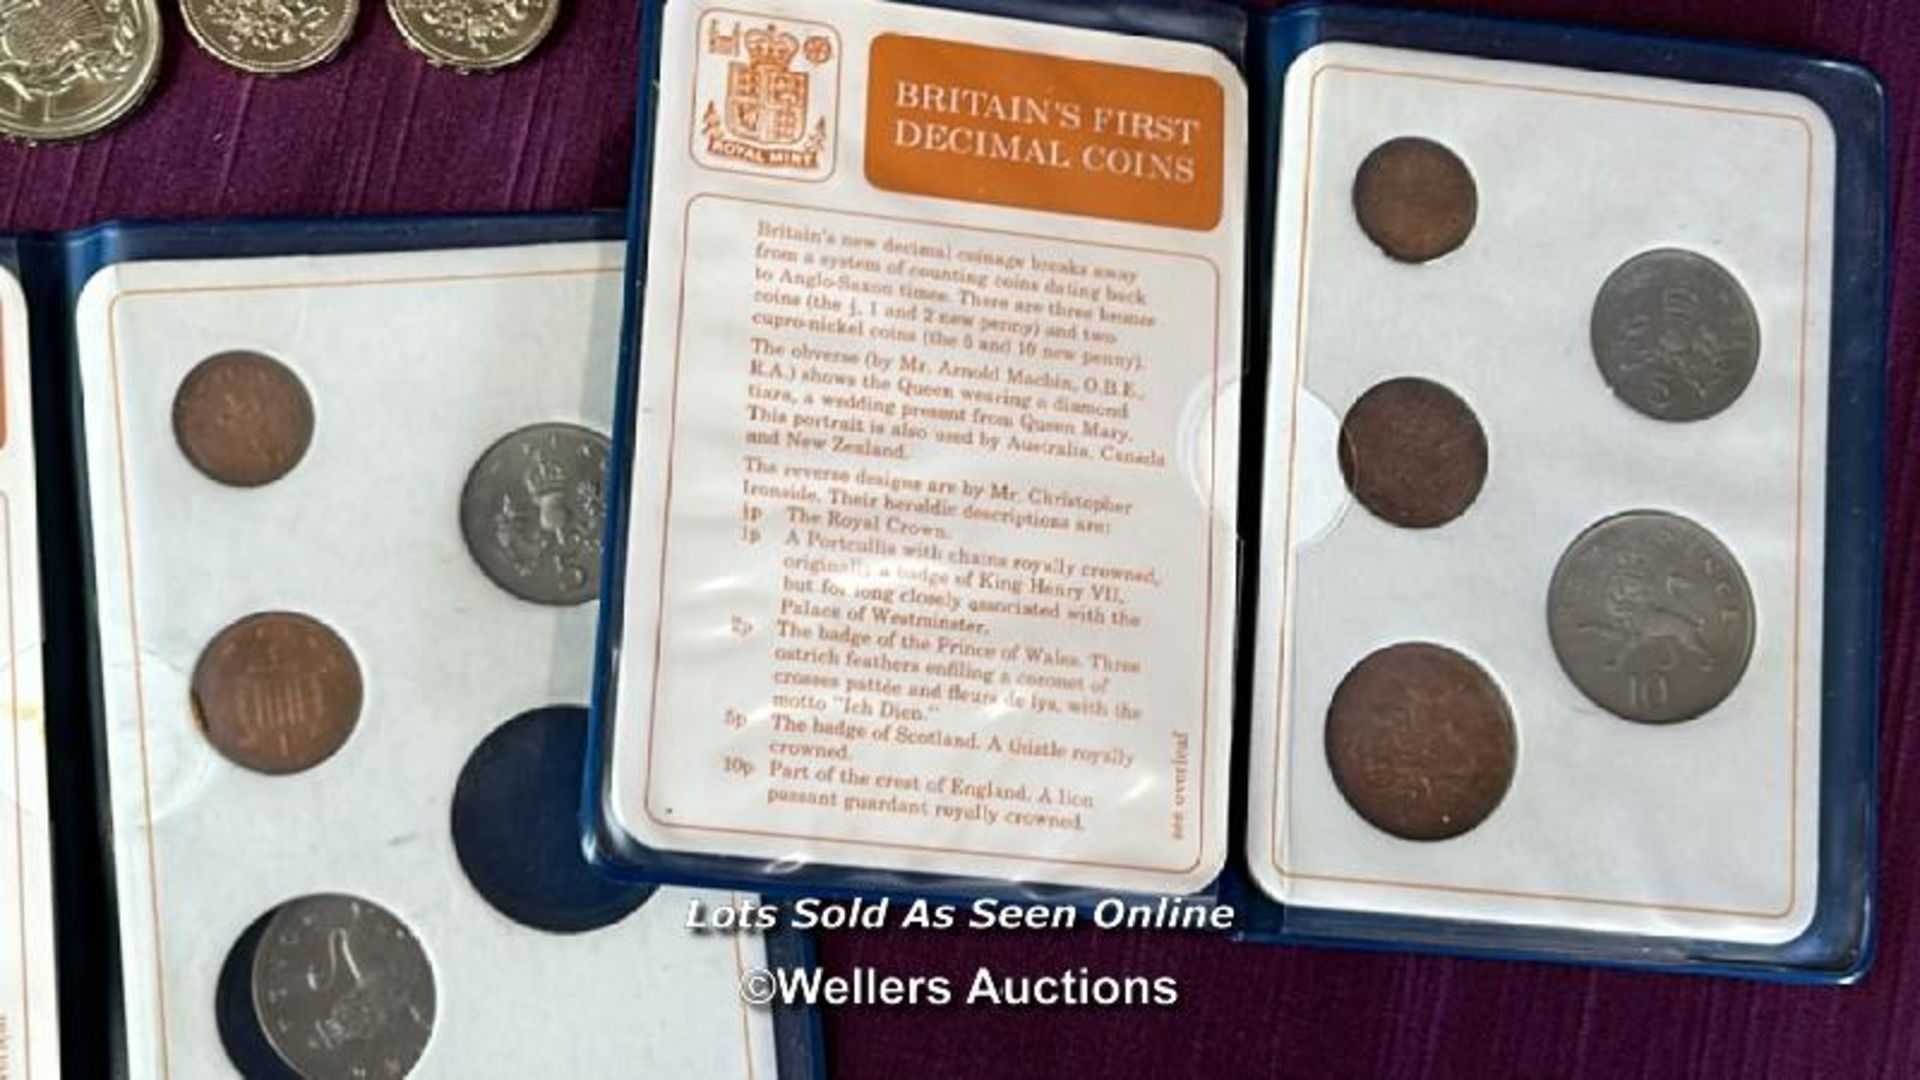 LARGE COLLECTION OF BRITISH COMMEMORATIVE COINS INCLUDING EARLY £1 AND £2 COINS AND SILVER JUBILEE - Image 8 of 9